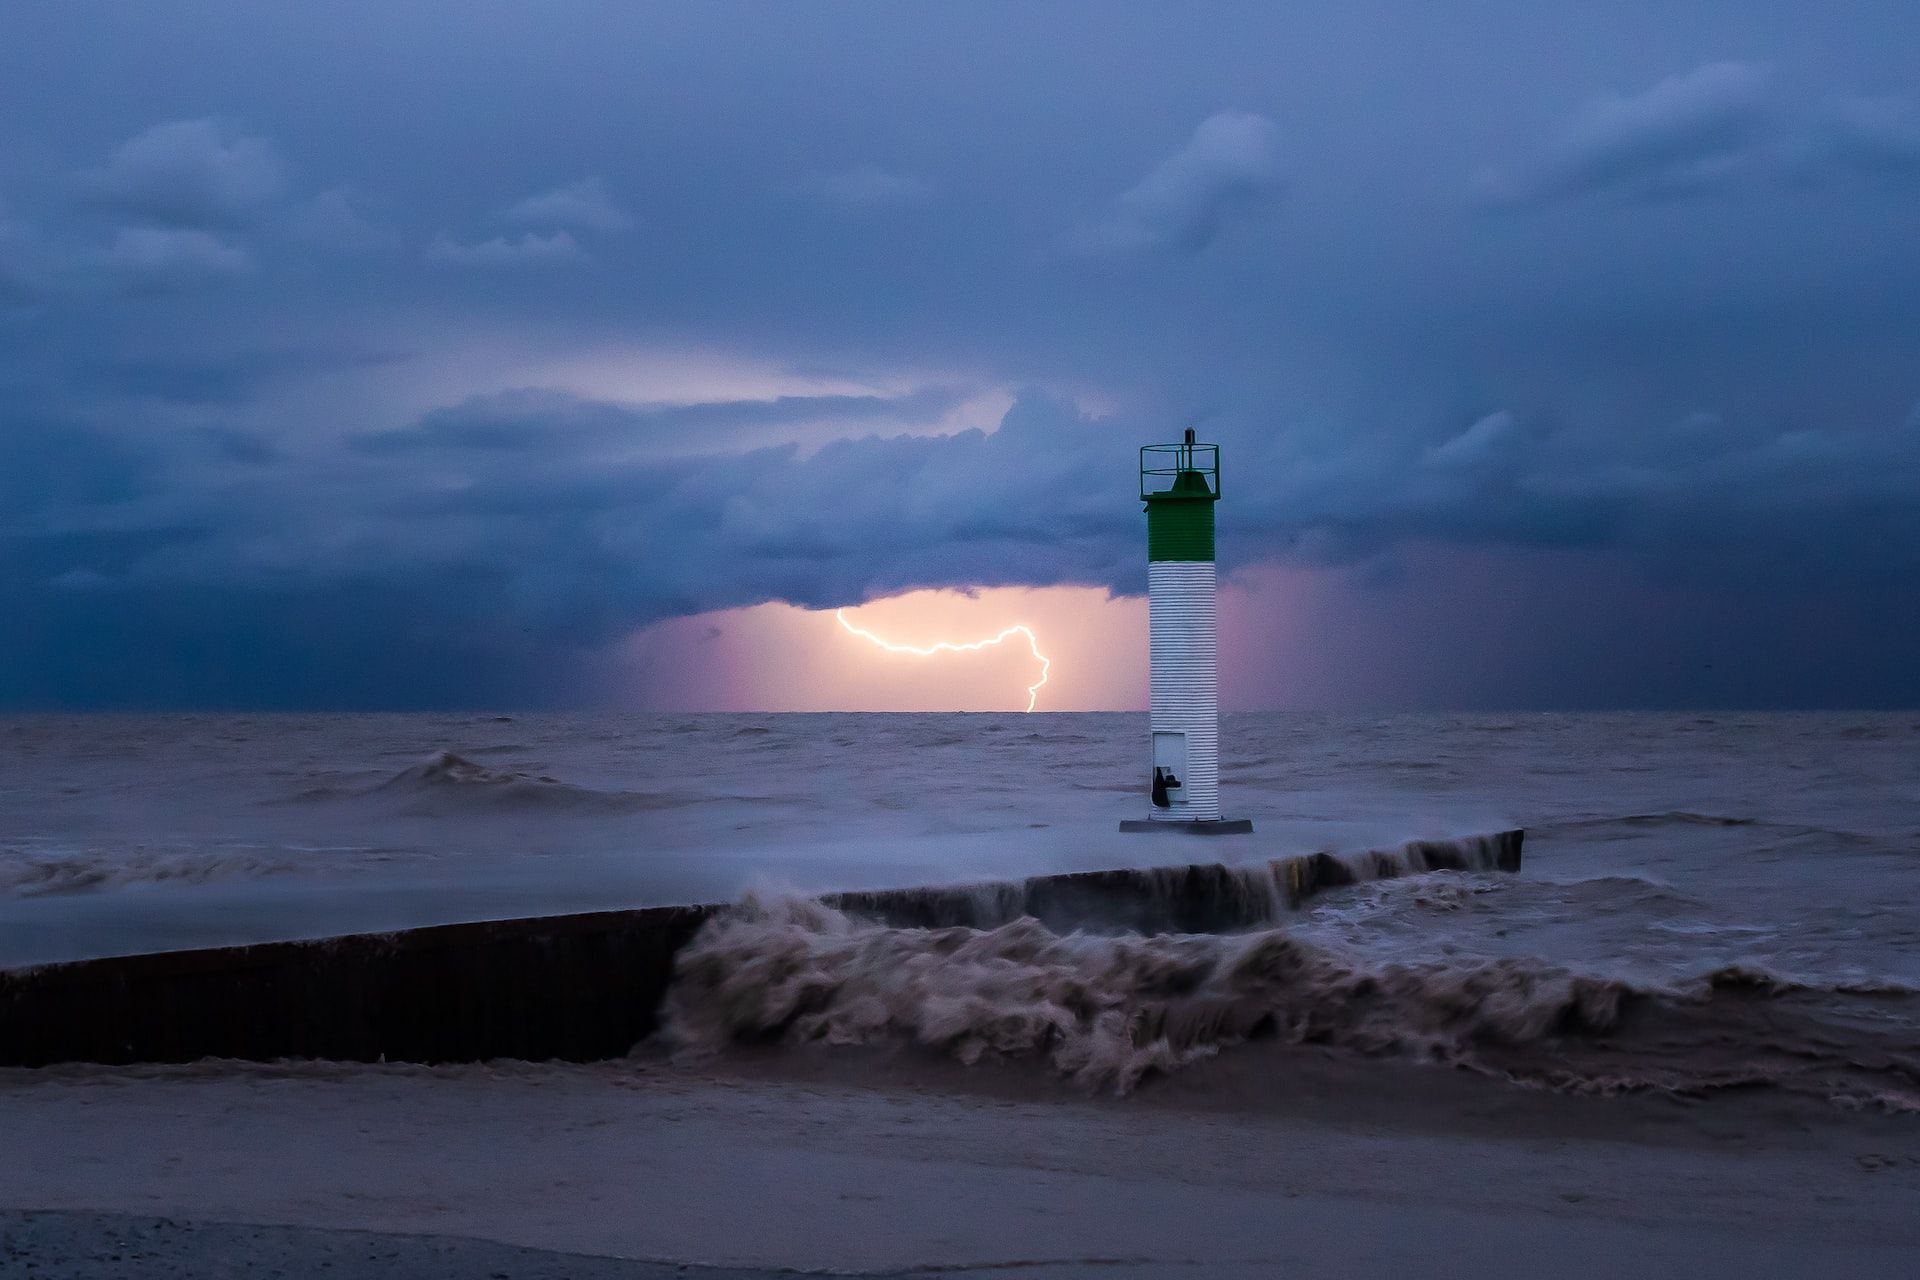 Lightning striking with a lighthouse in the foreground